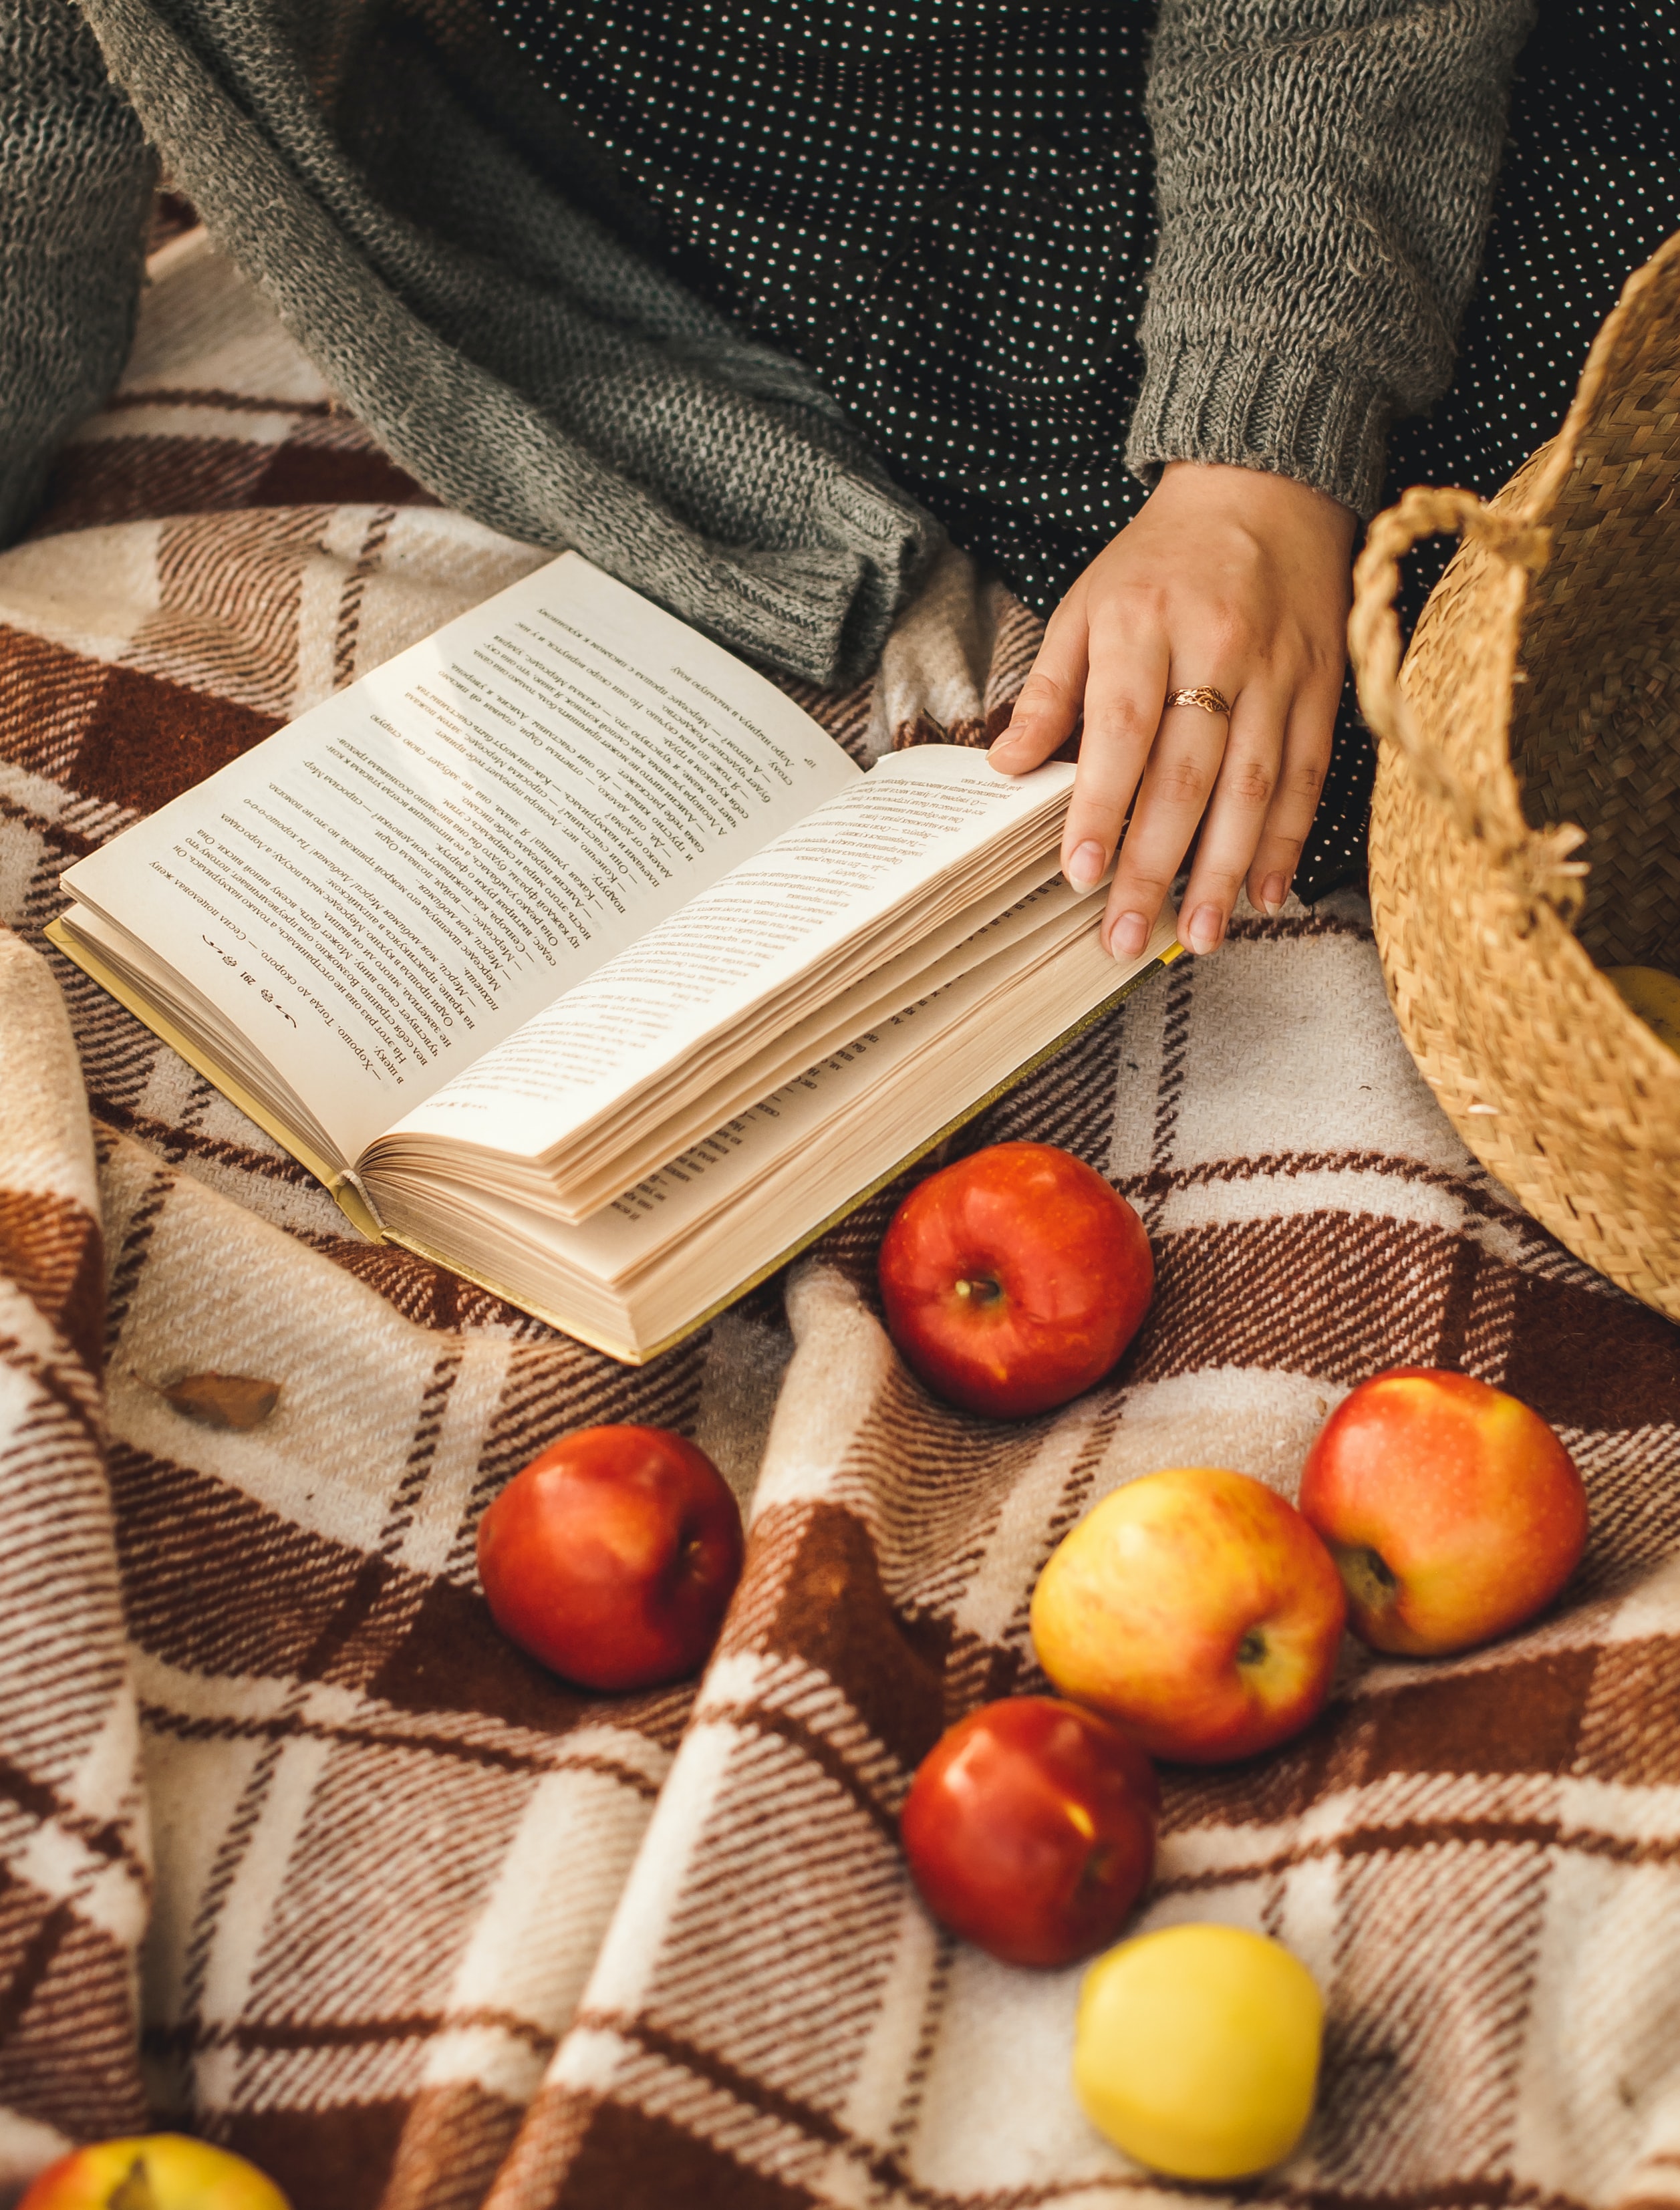 relaxation, apples, hand, miscellanea, miscellaneous, rest, book, plaid